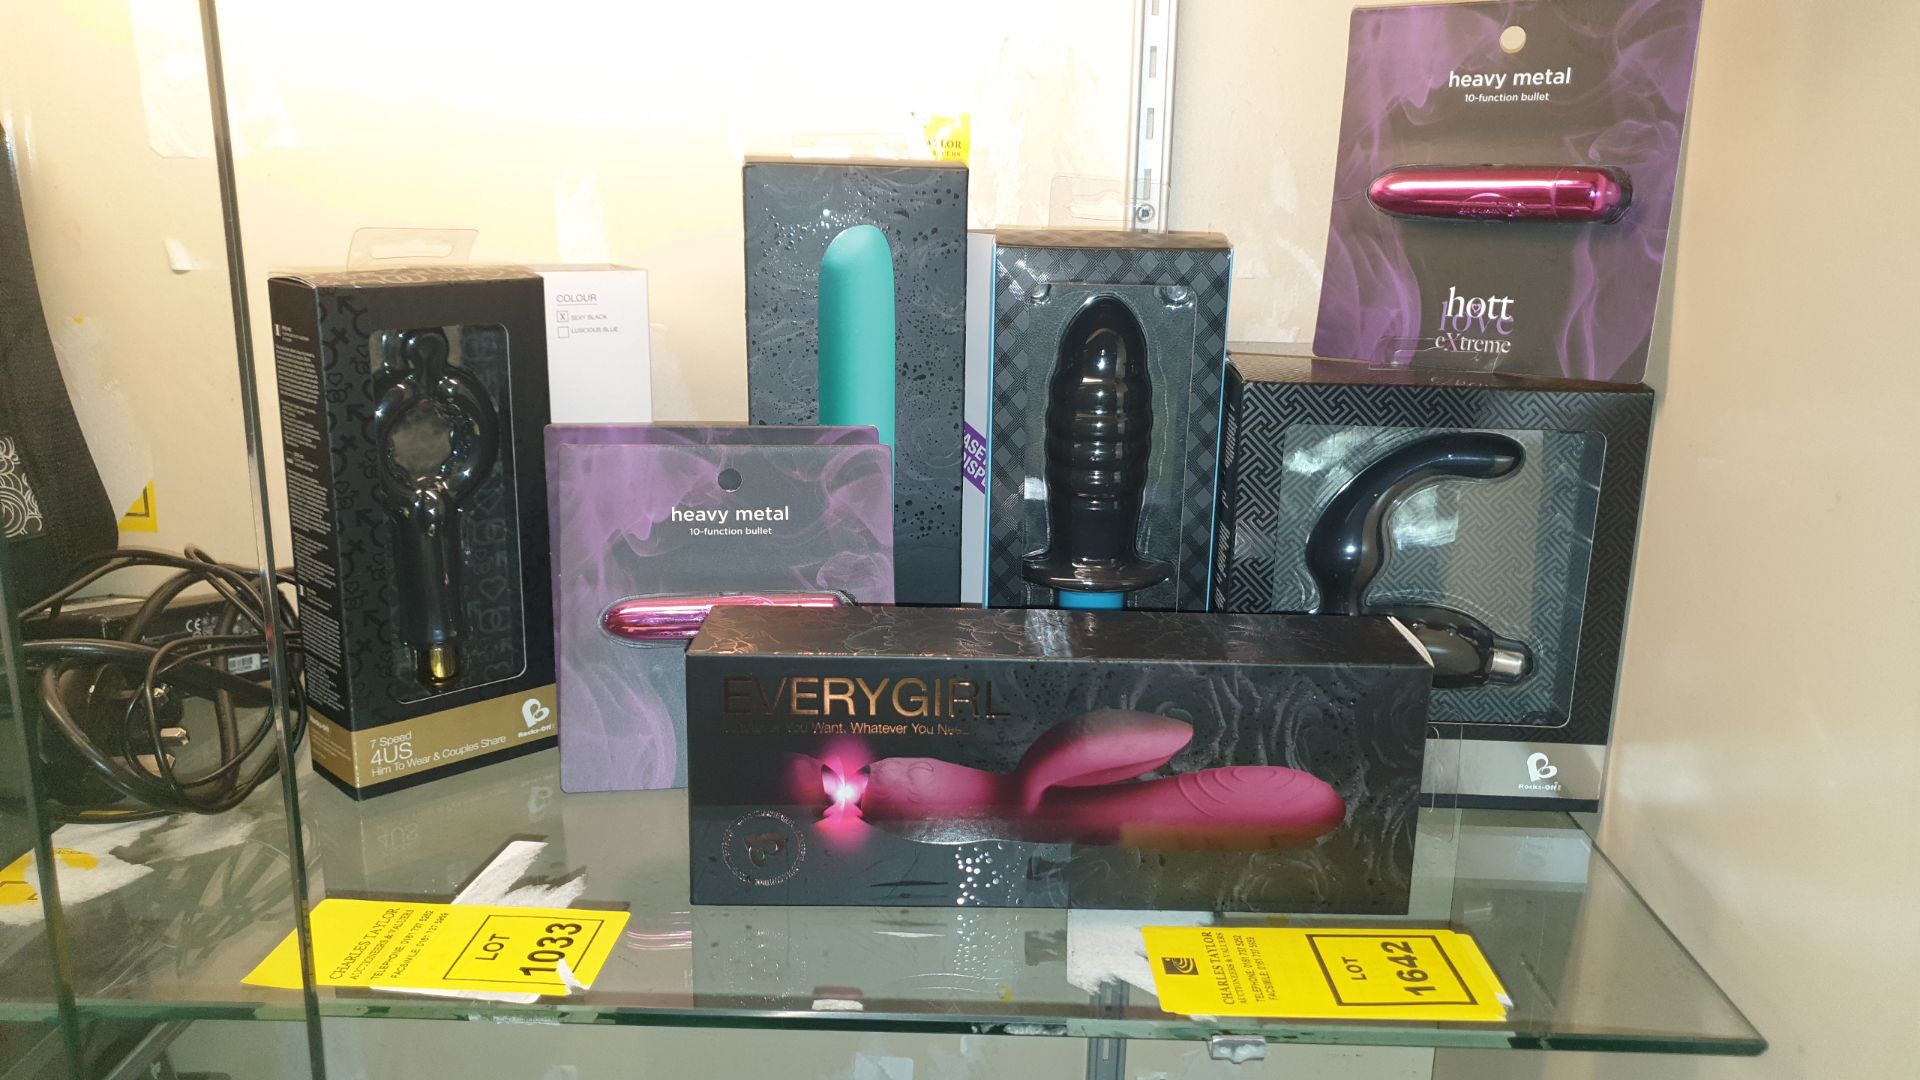 (LOT FOR THURSDAY 28TH MAY AUCTION) 8 X FEMALE / MALE PLEASURE TOYS (AS SEEN IN THE PHOTO) - BRAND